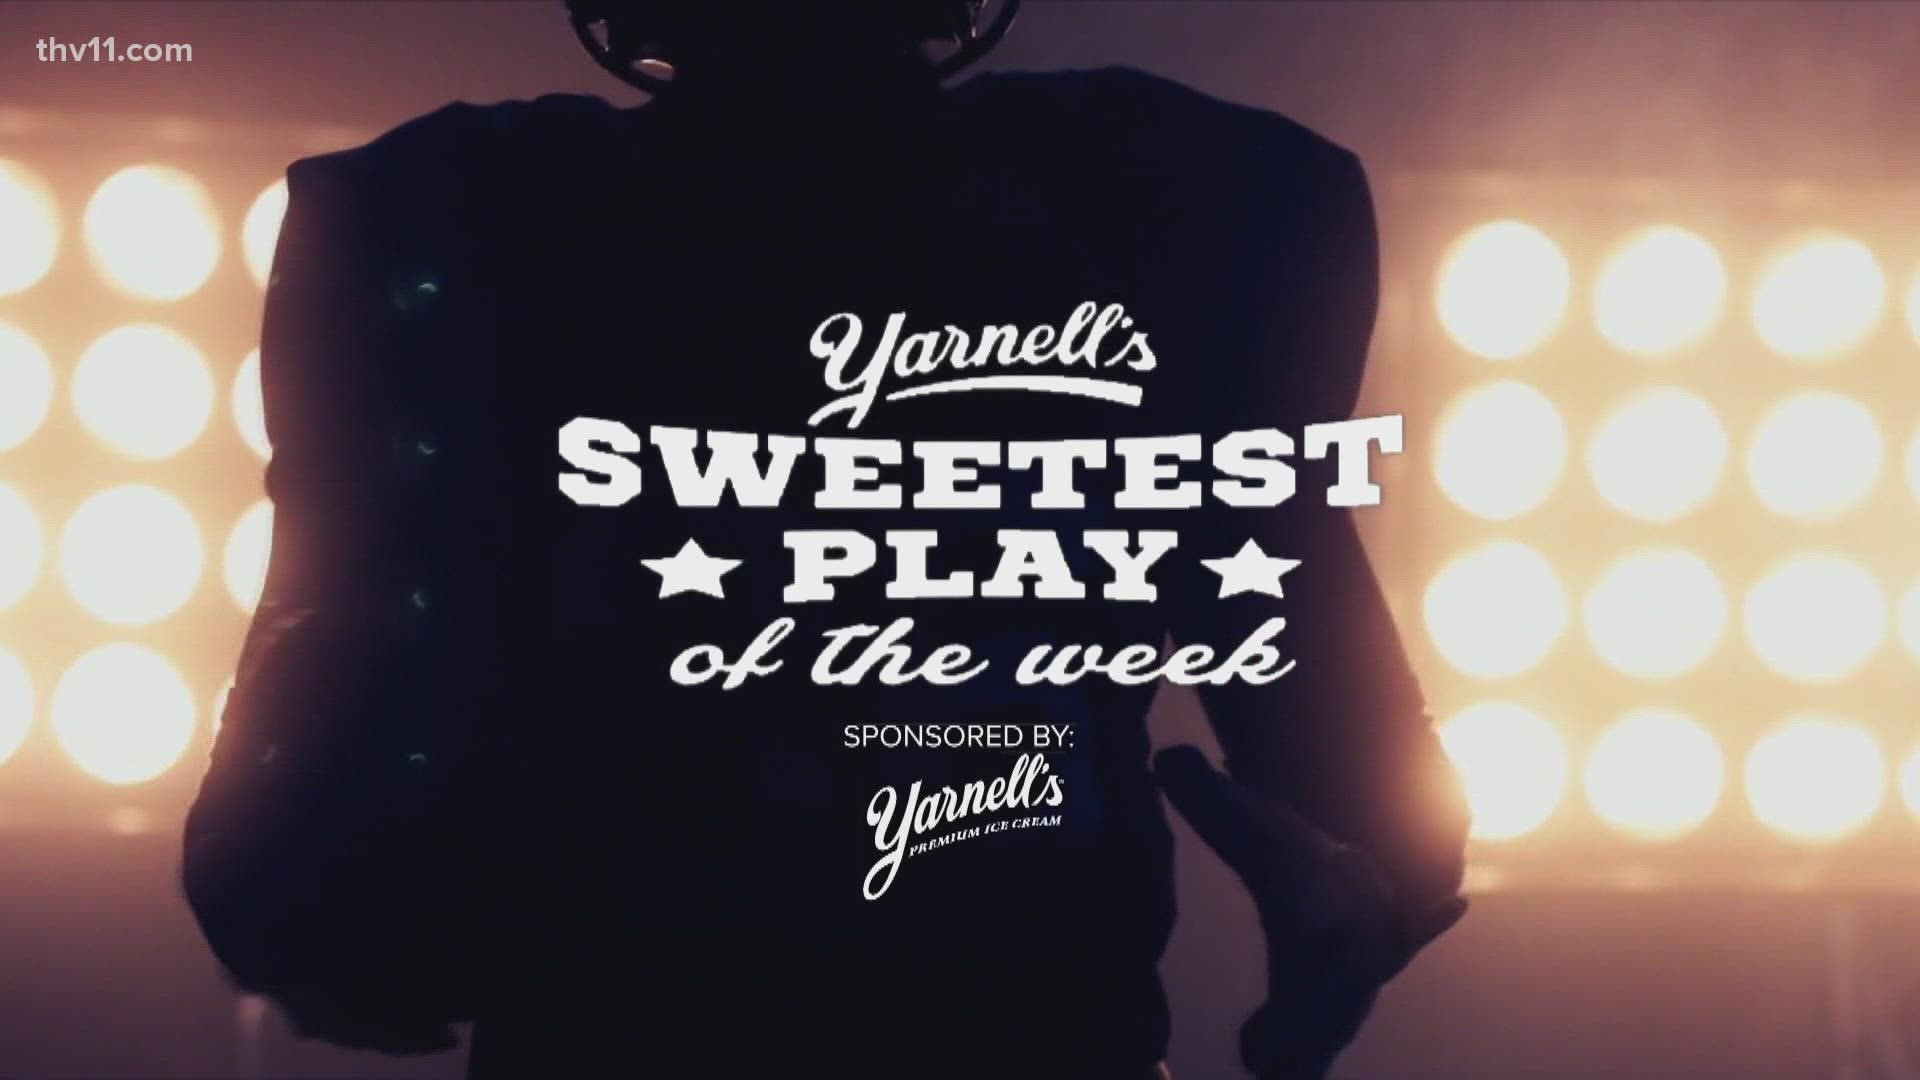 Vote for Yarnell's Sweetest play for Week 5!